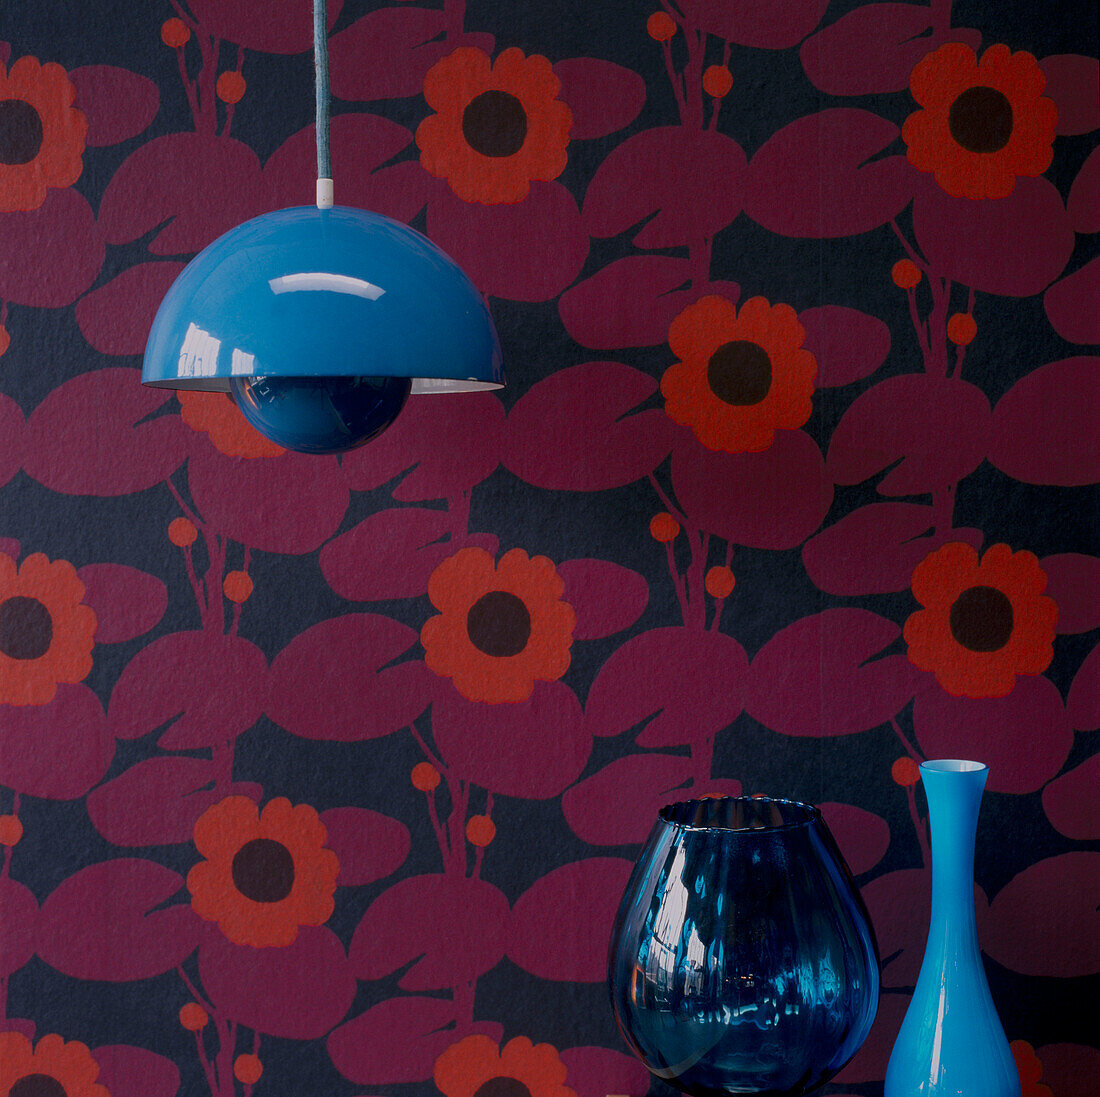 Red patterned wallpaper hanging light and glass home wares